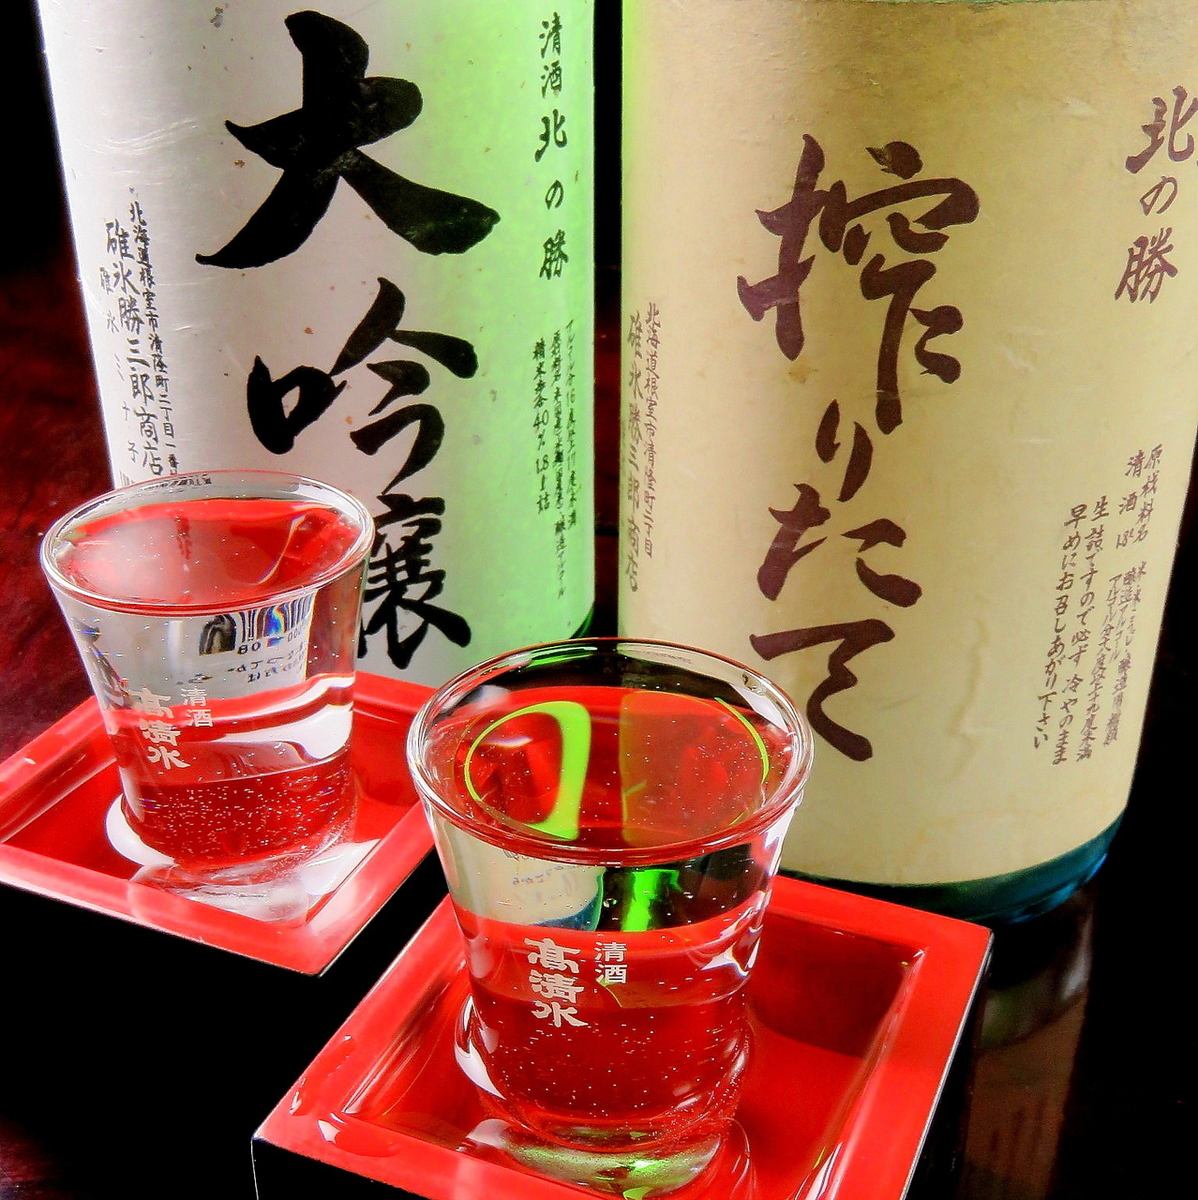 Nemuro "Kita no Katsu" Daiginjo etc. are available for a limited time only! *Depends on the season